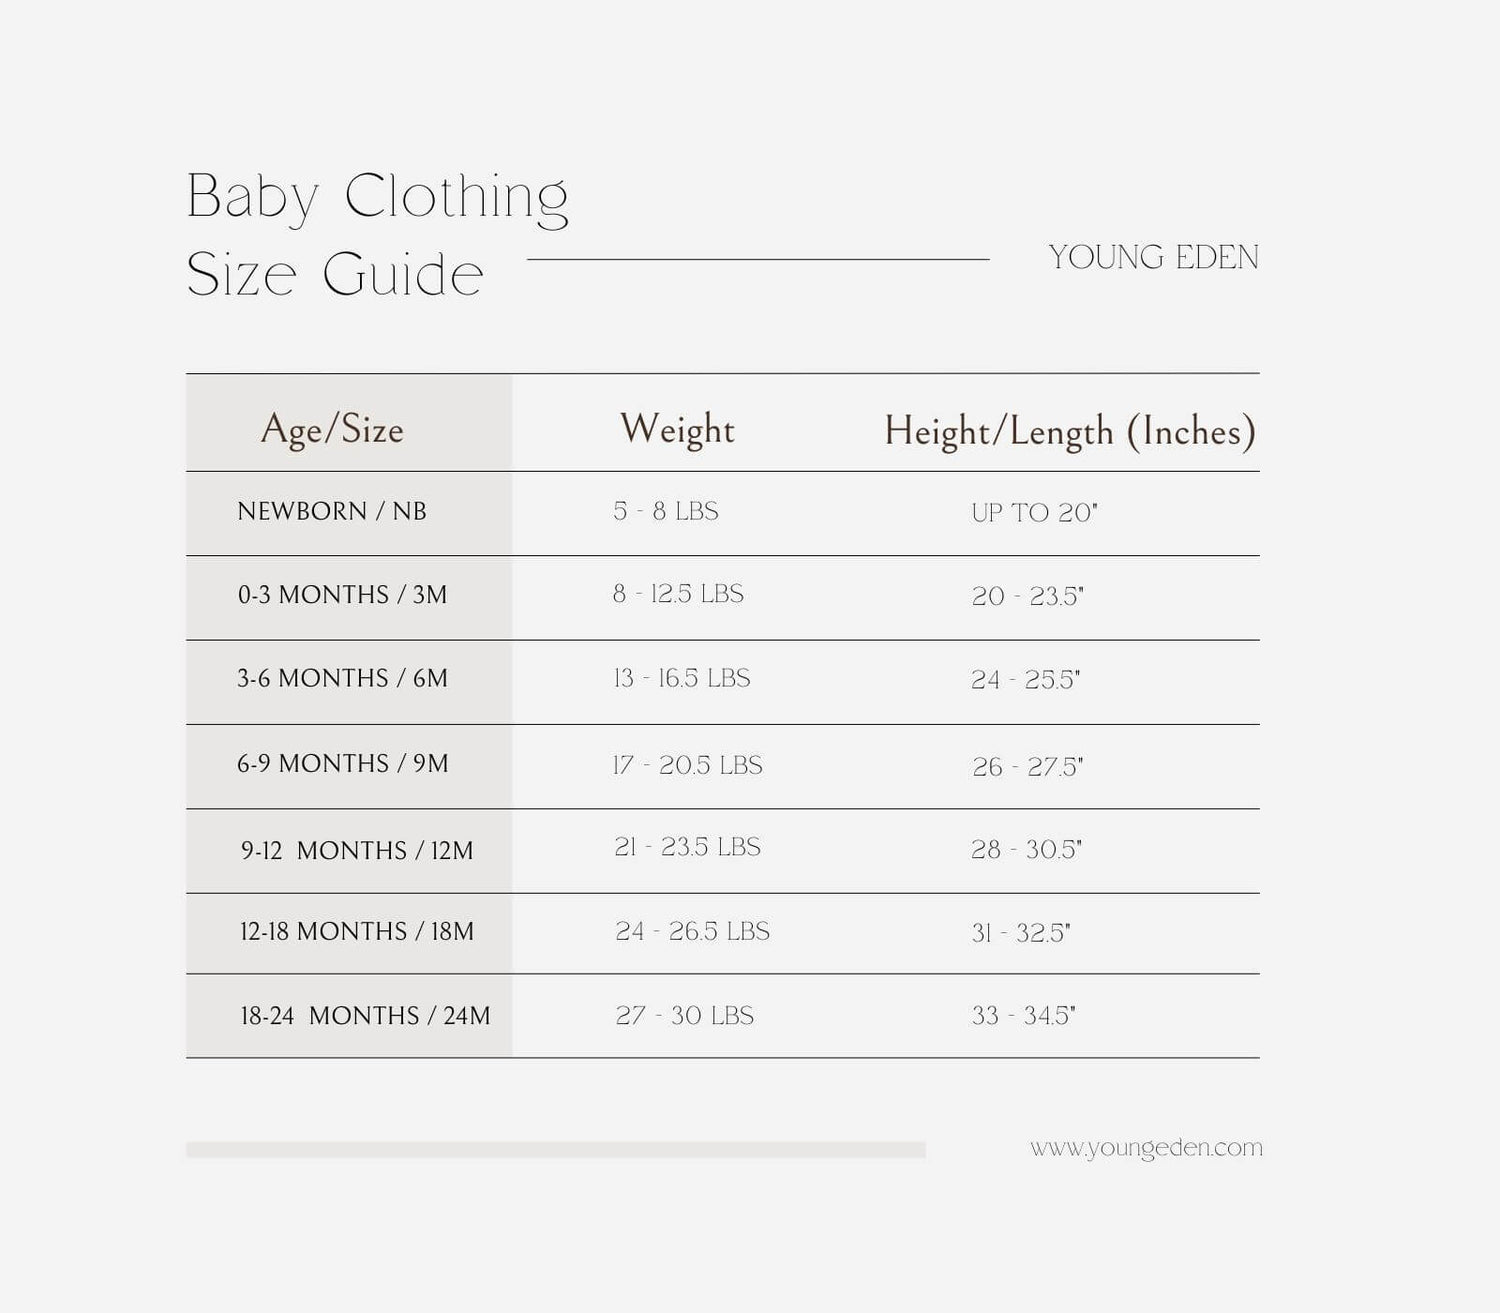 Help Center : Size Guide - Clothing